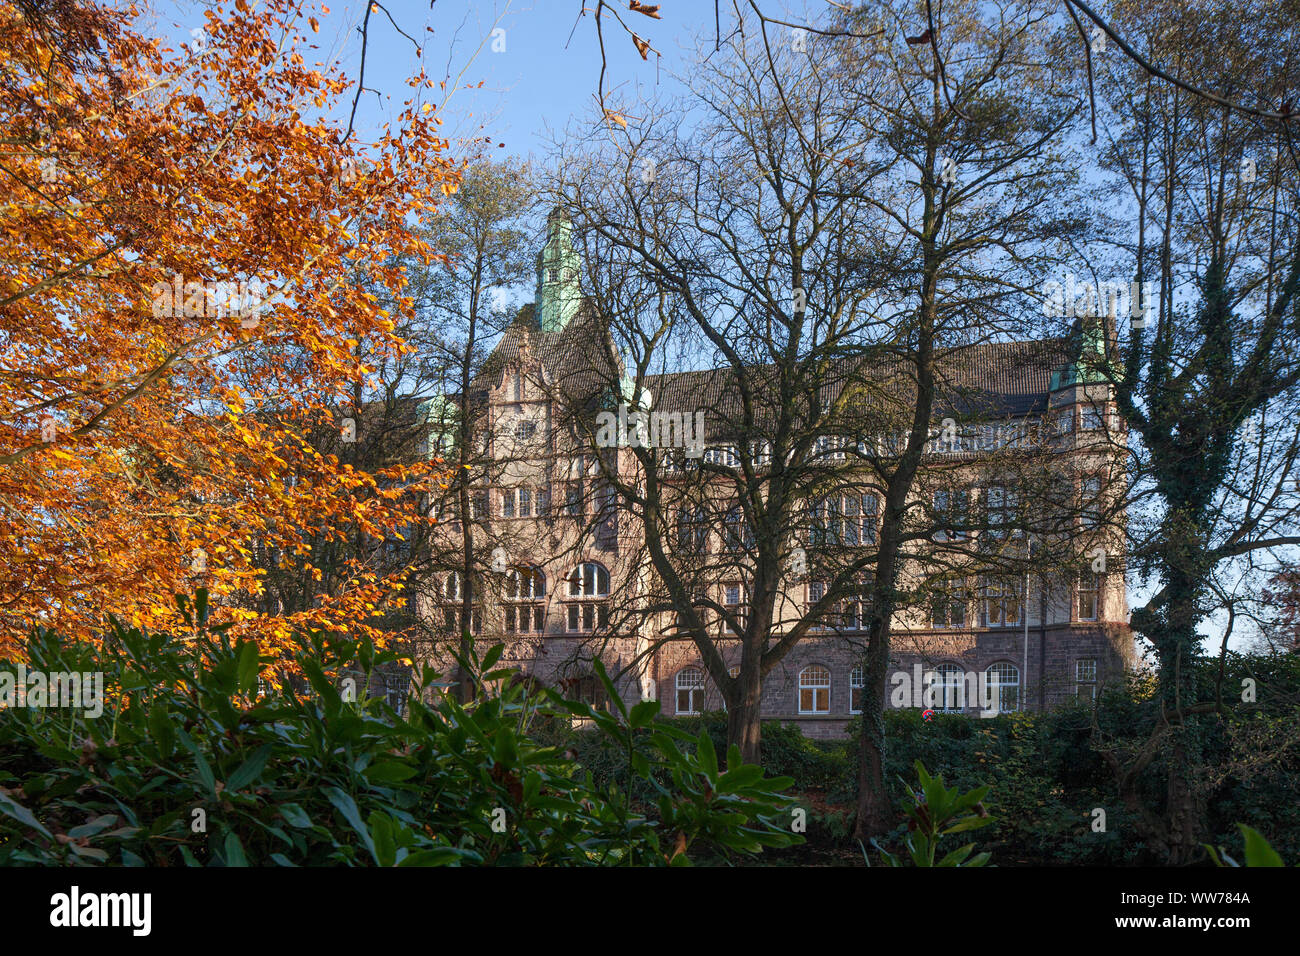 Autumn mood, Palace Gardens, Amtsgericht Building, City of Oldenburg in the District of Oldenburg, Lower Saxony, Germany Stock Photo